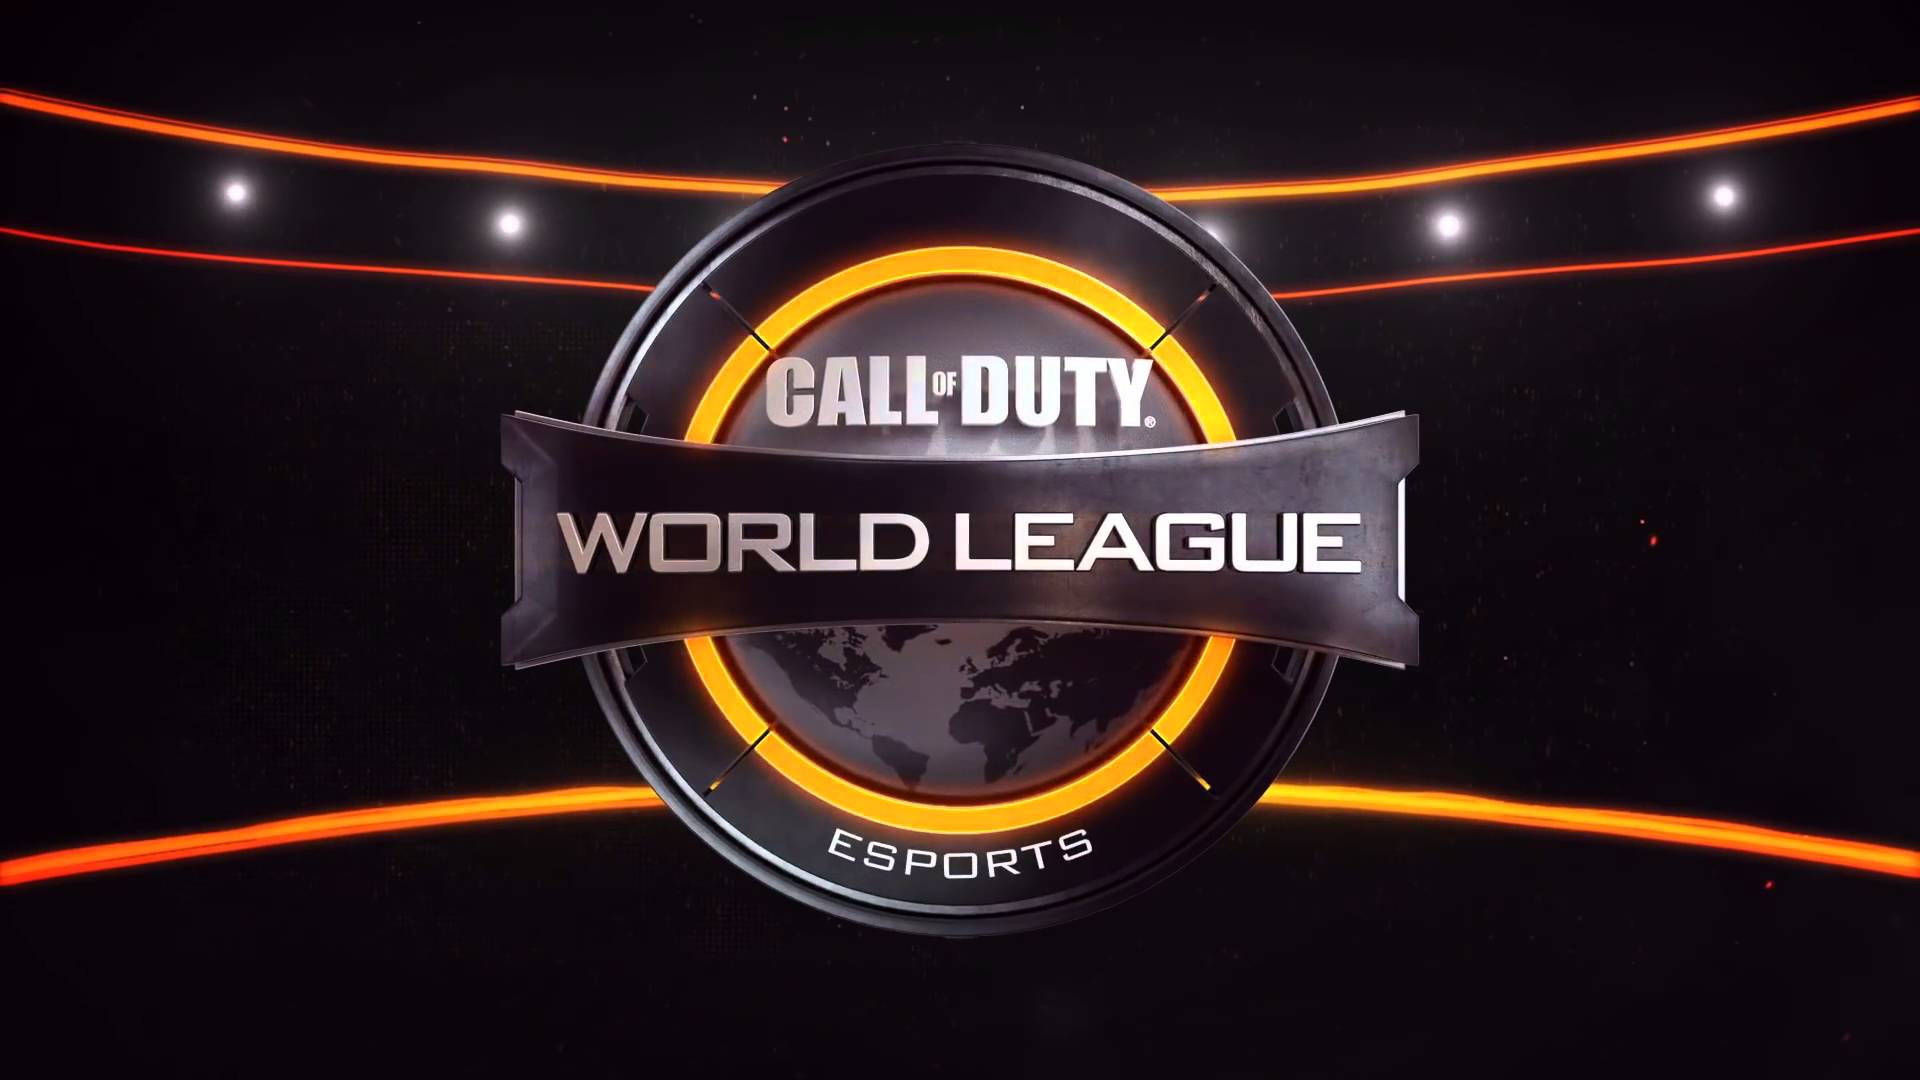 Latest Call of Duty World League Season to feature 5v5 format and $6m prize pool